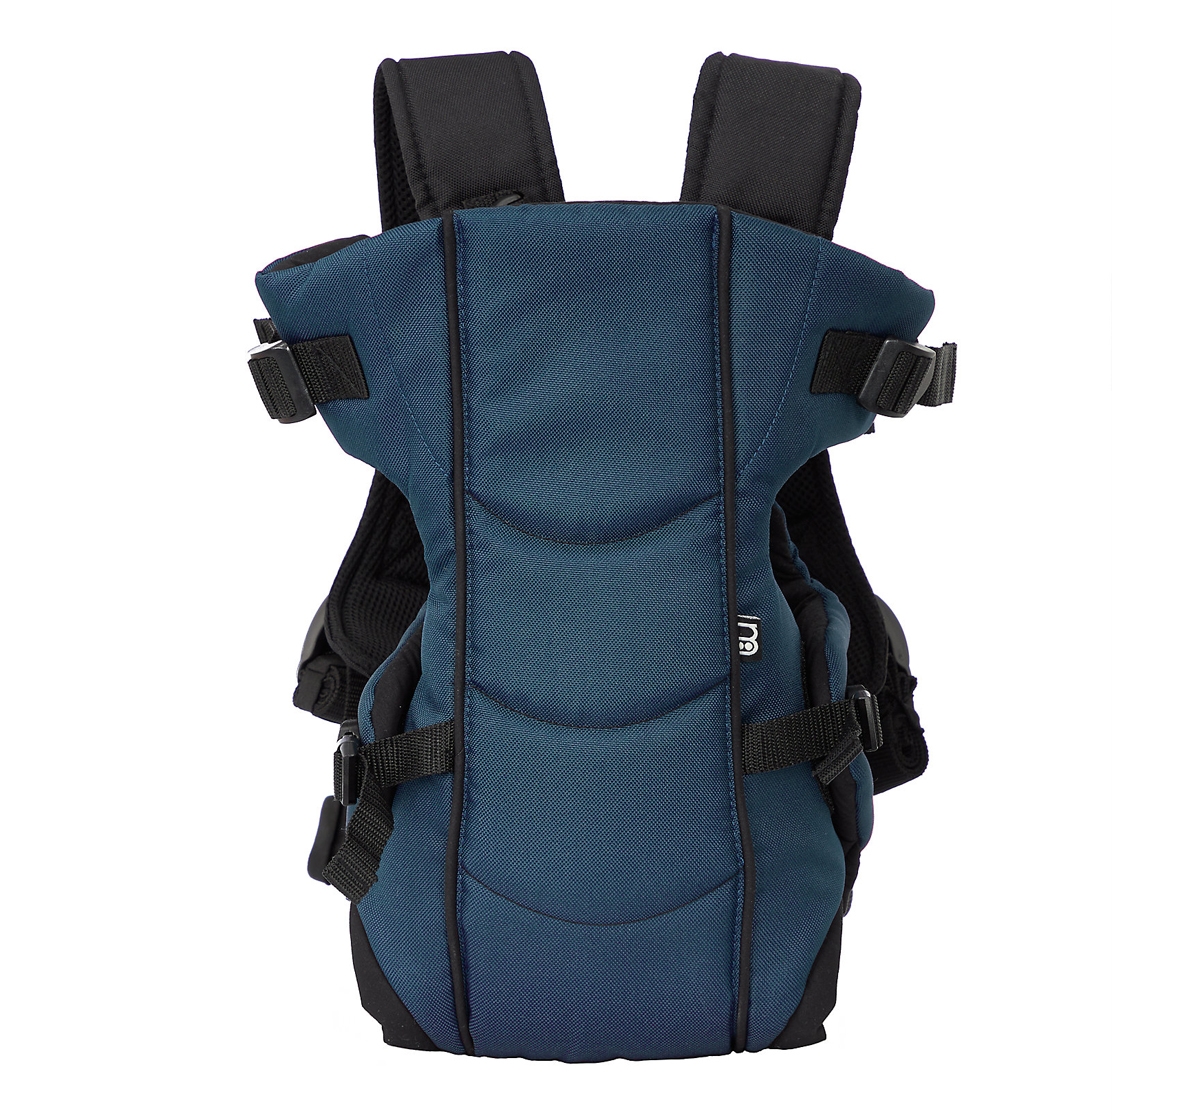 Mothercare | Mothercare 3 Position Baby Carrier Teal